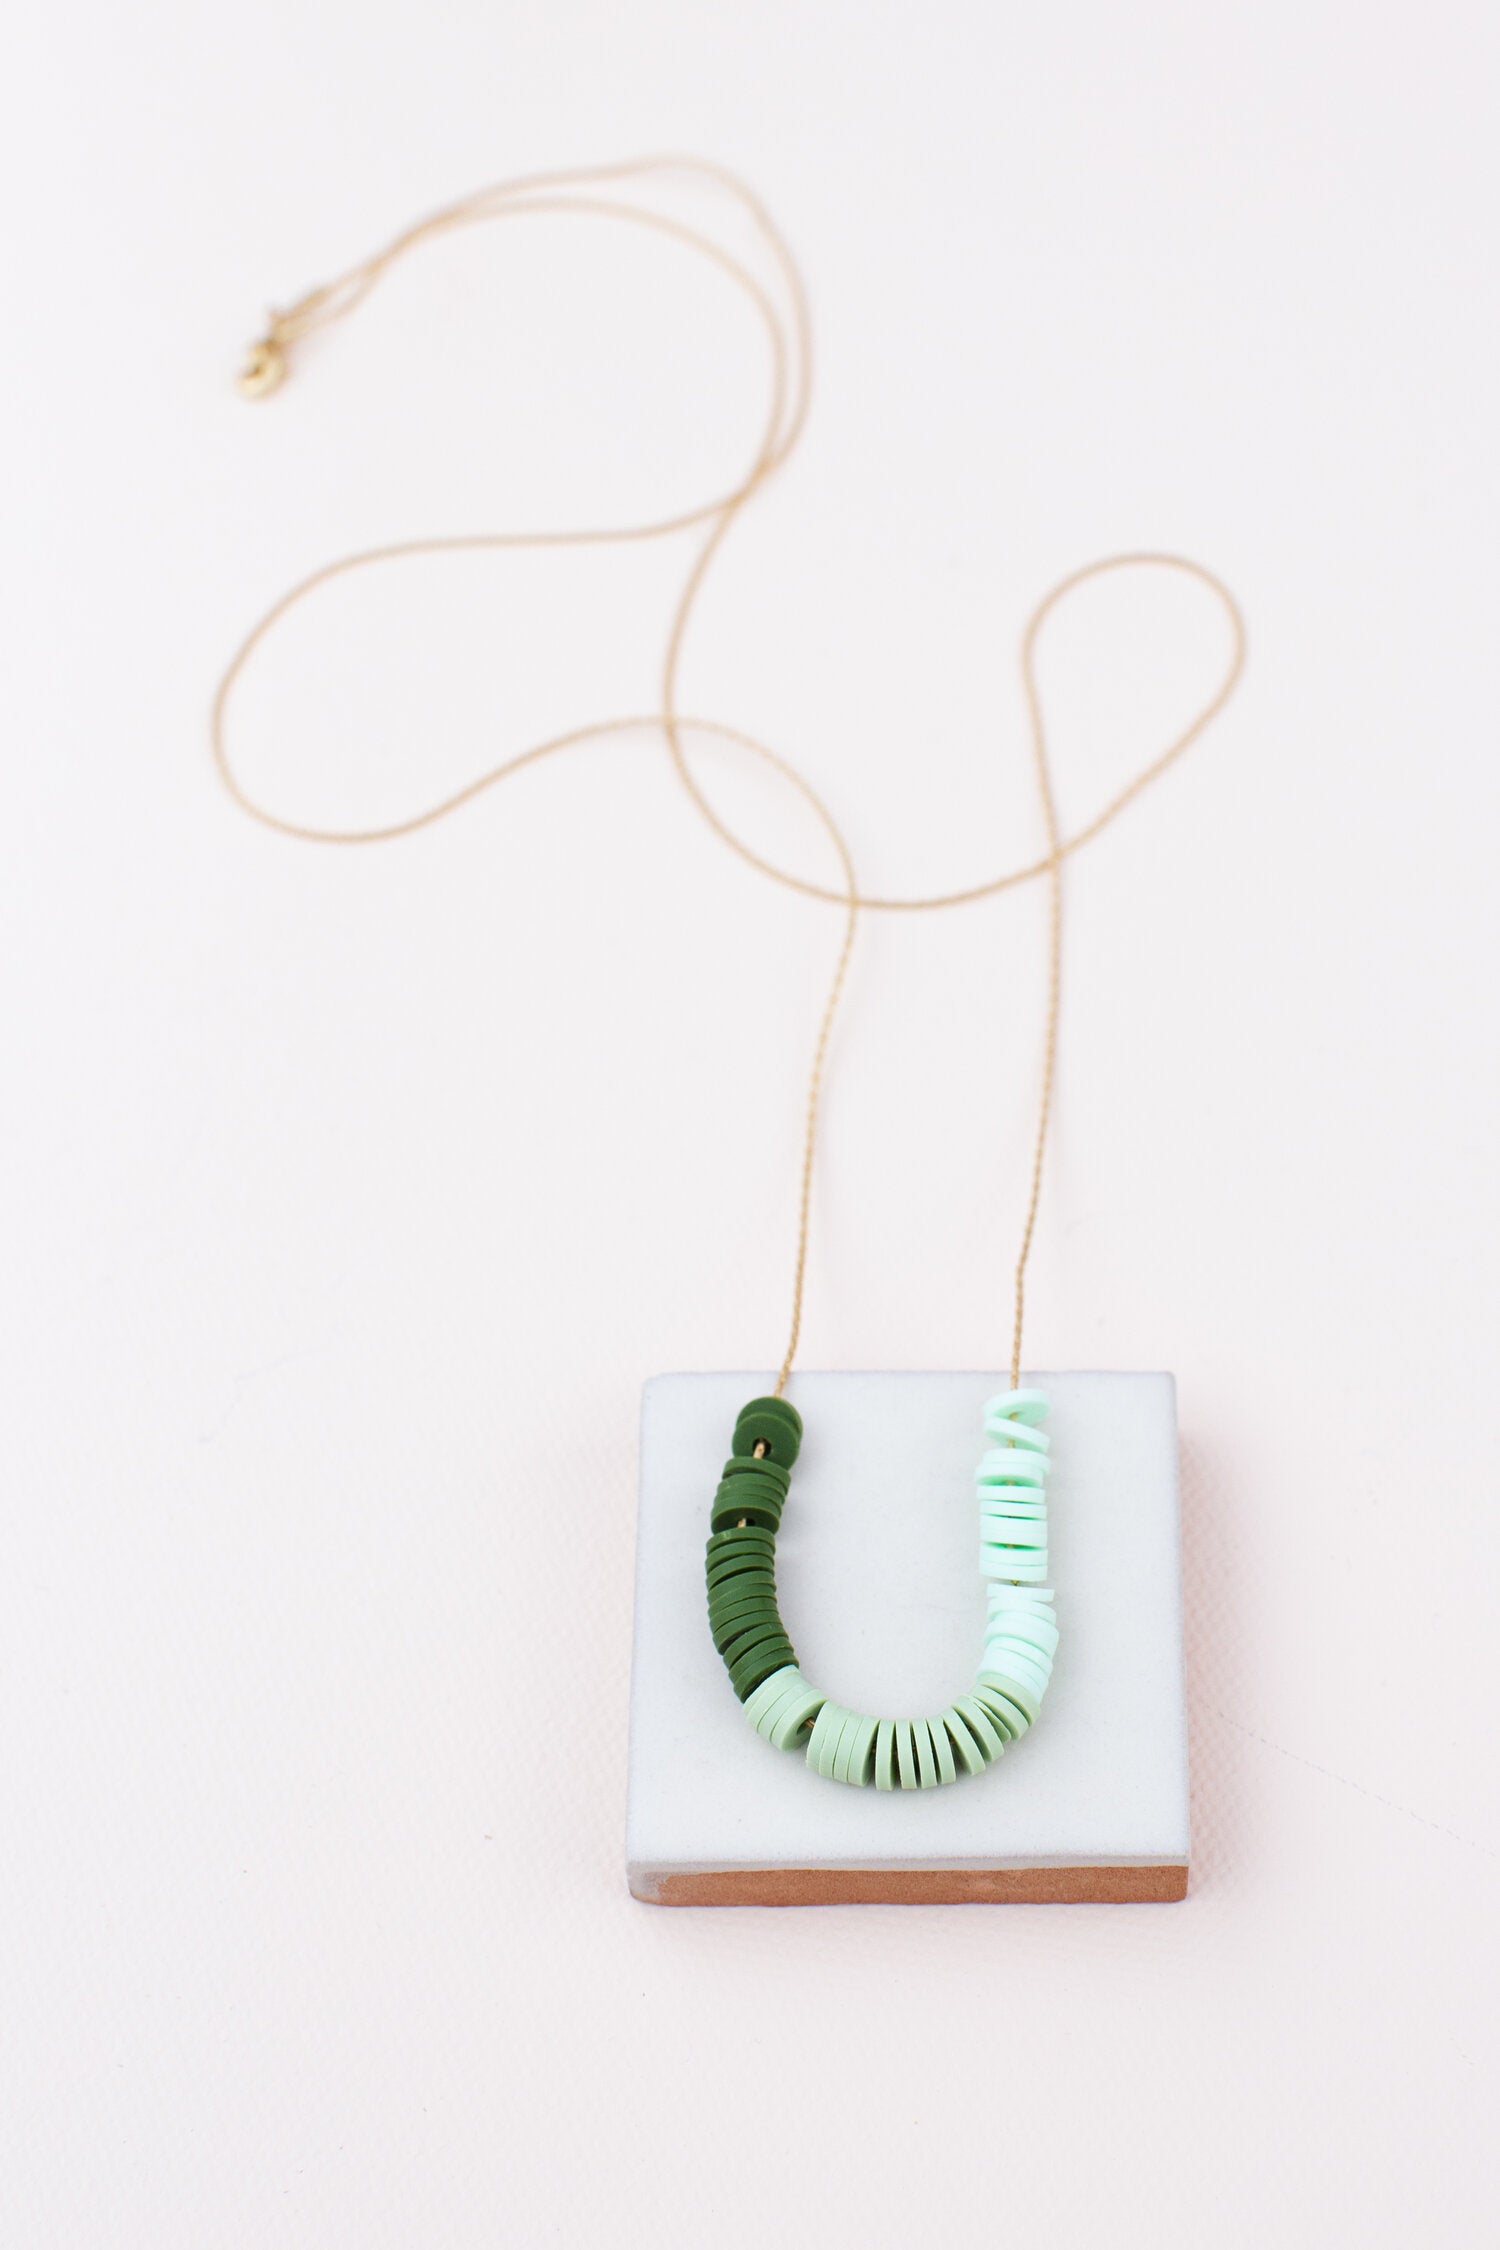 Summer Fun Color Block Necklace by Samantha Slater